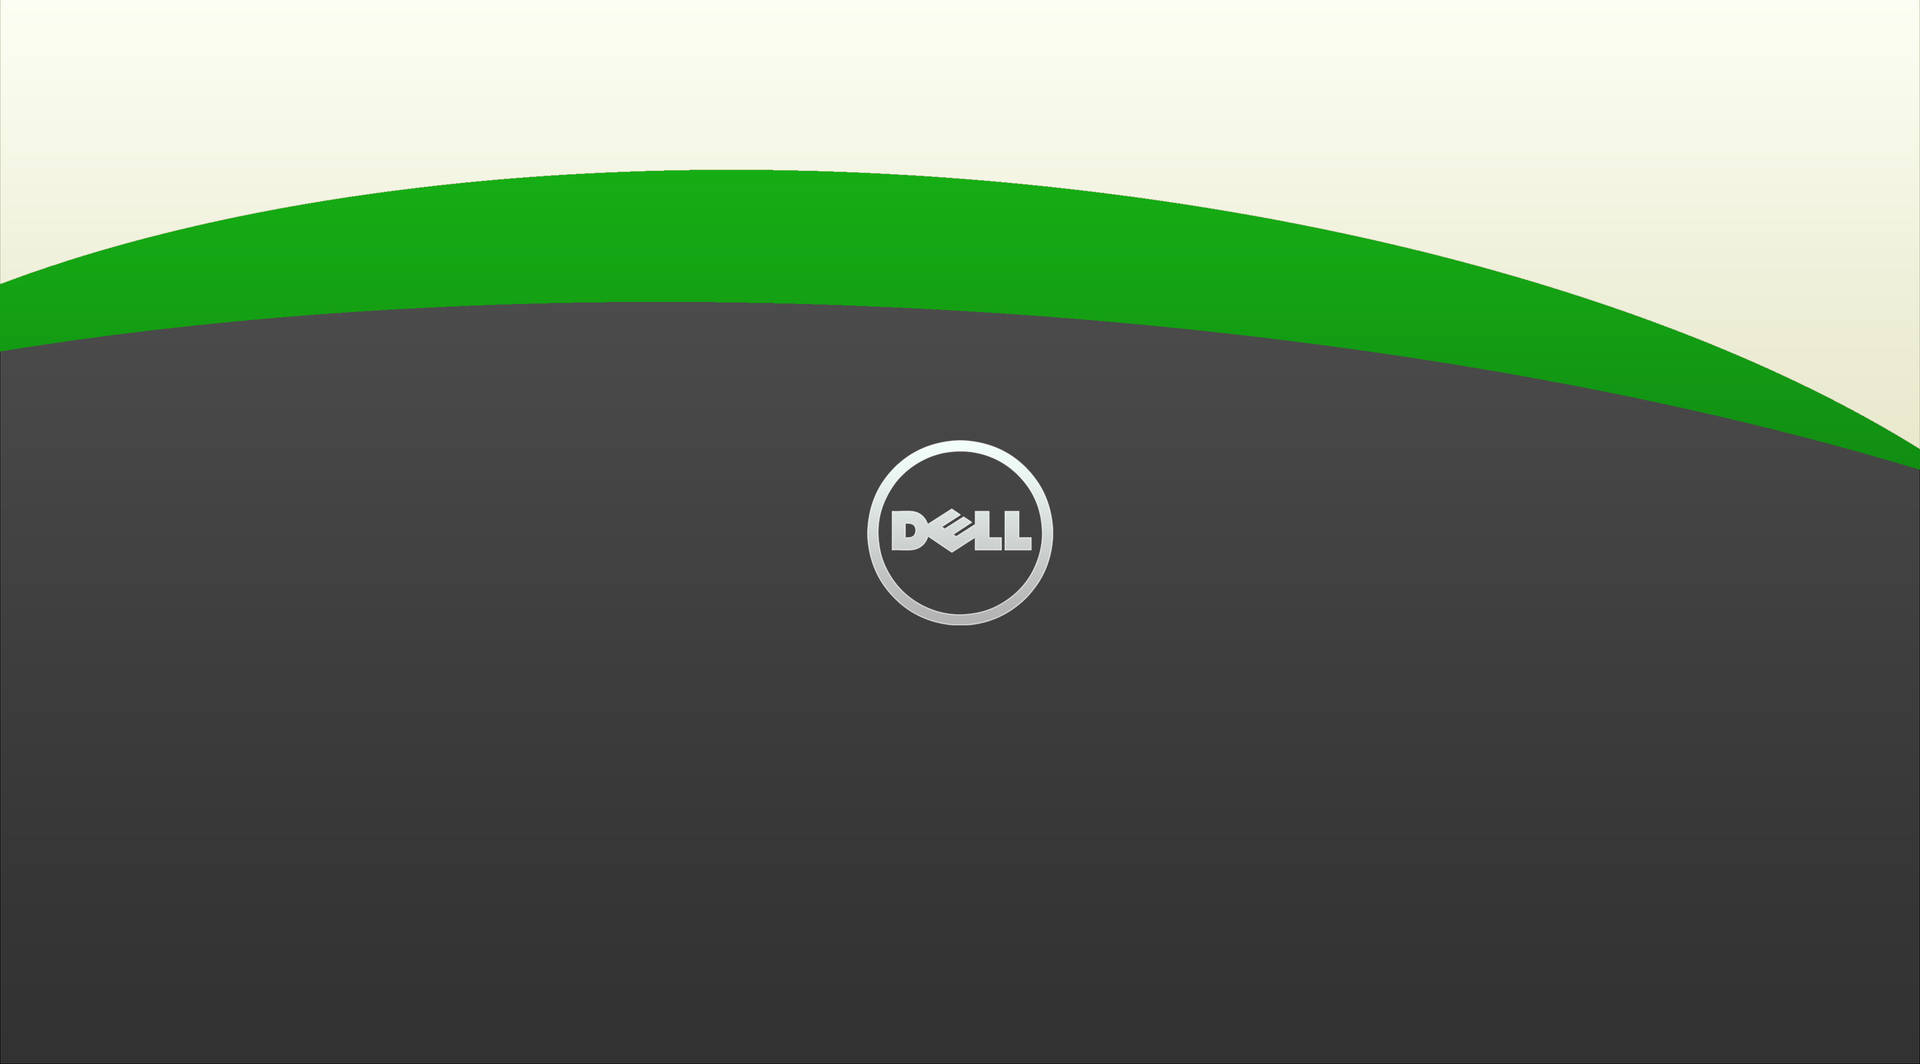 Dell 4k Gray And Green Background